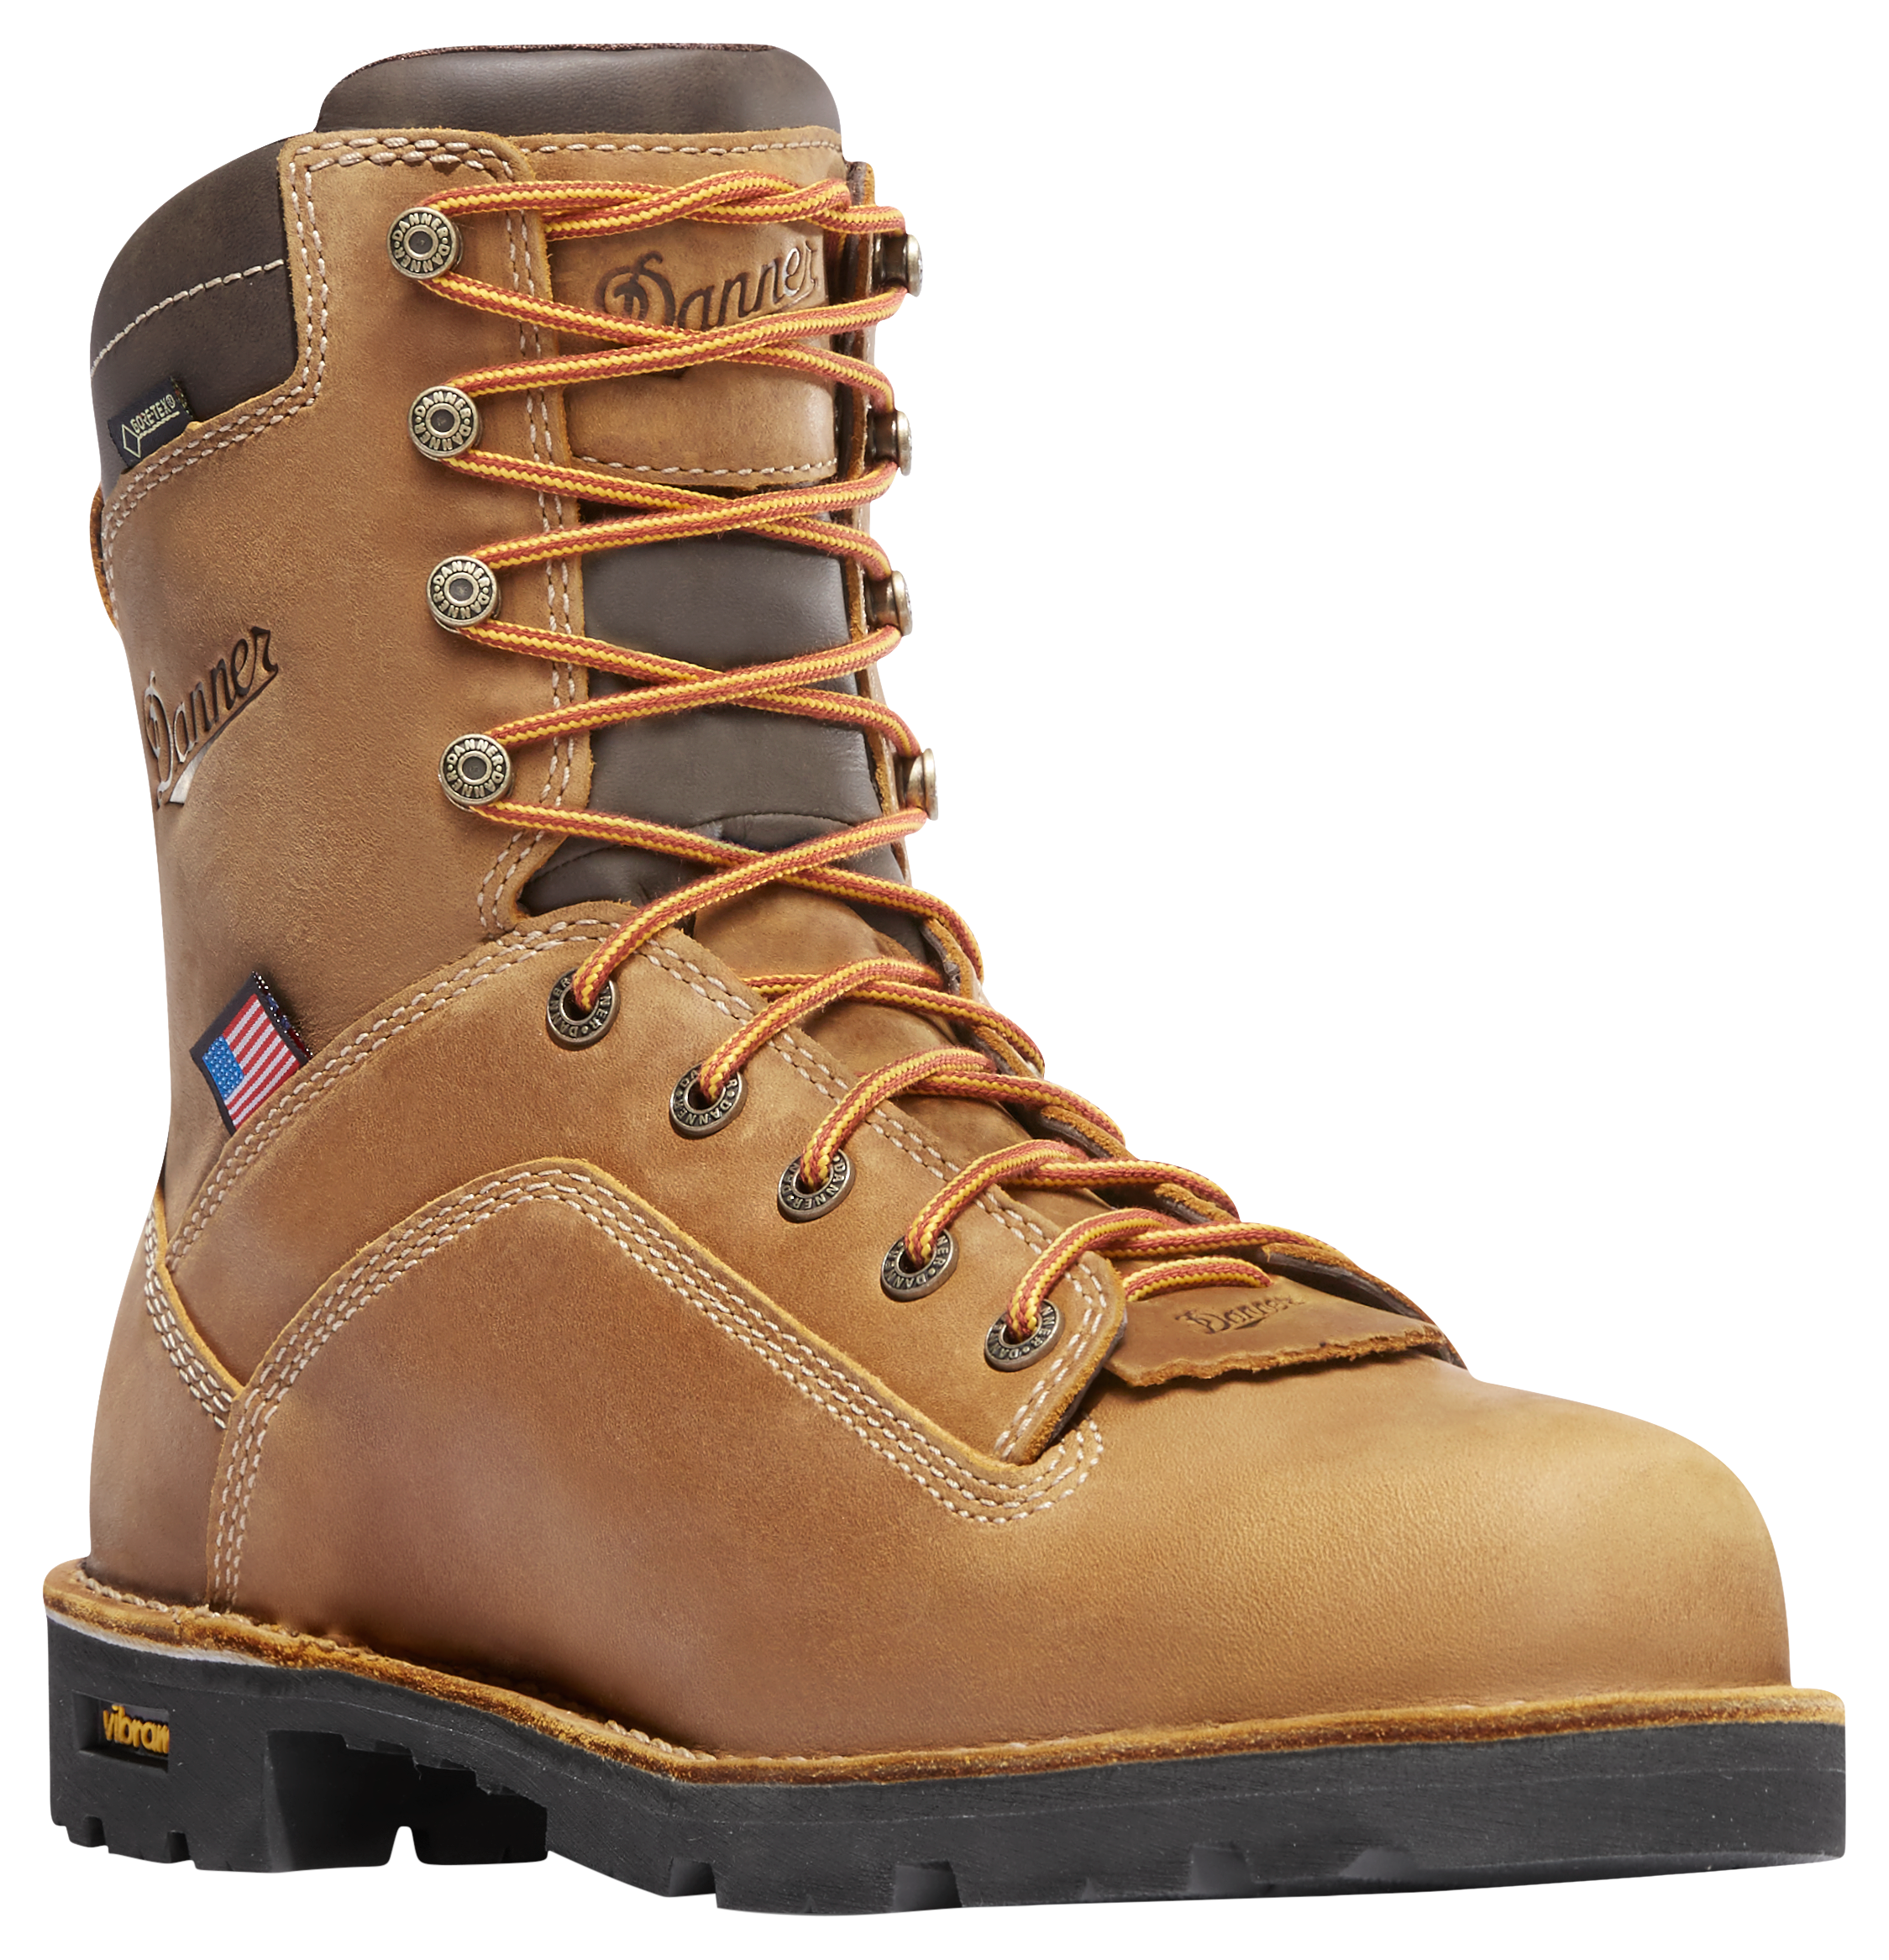 Danner Quarry USA GORE-TEX Insulated Composite Toe Work Boots for Men - Distressed Brown -  9.5W